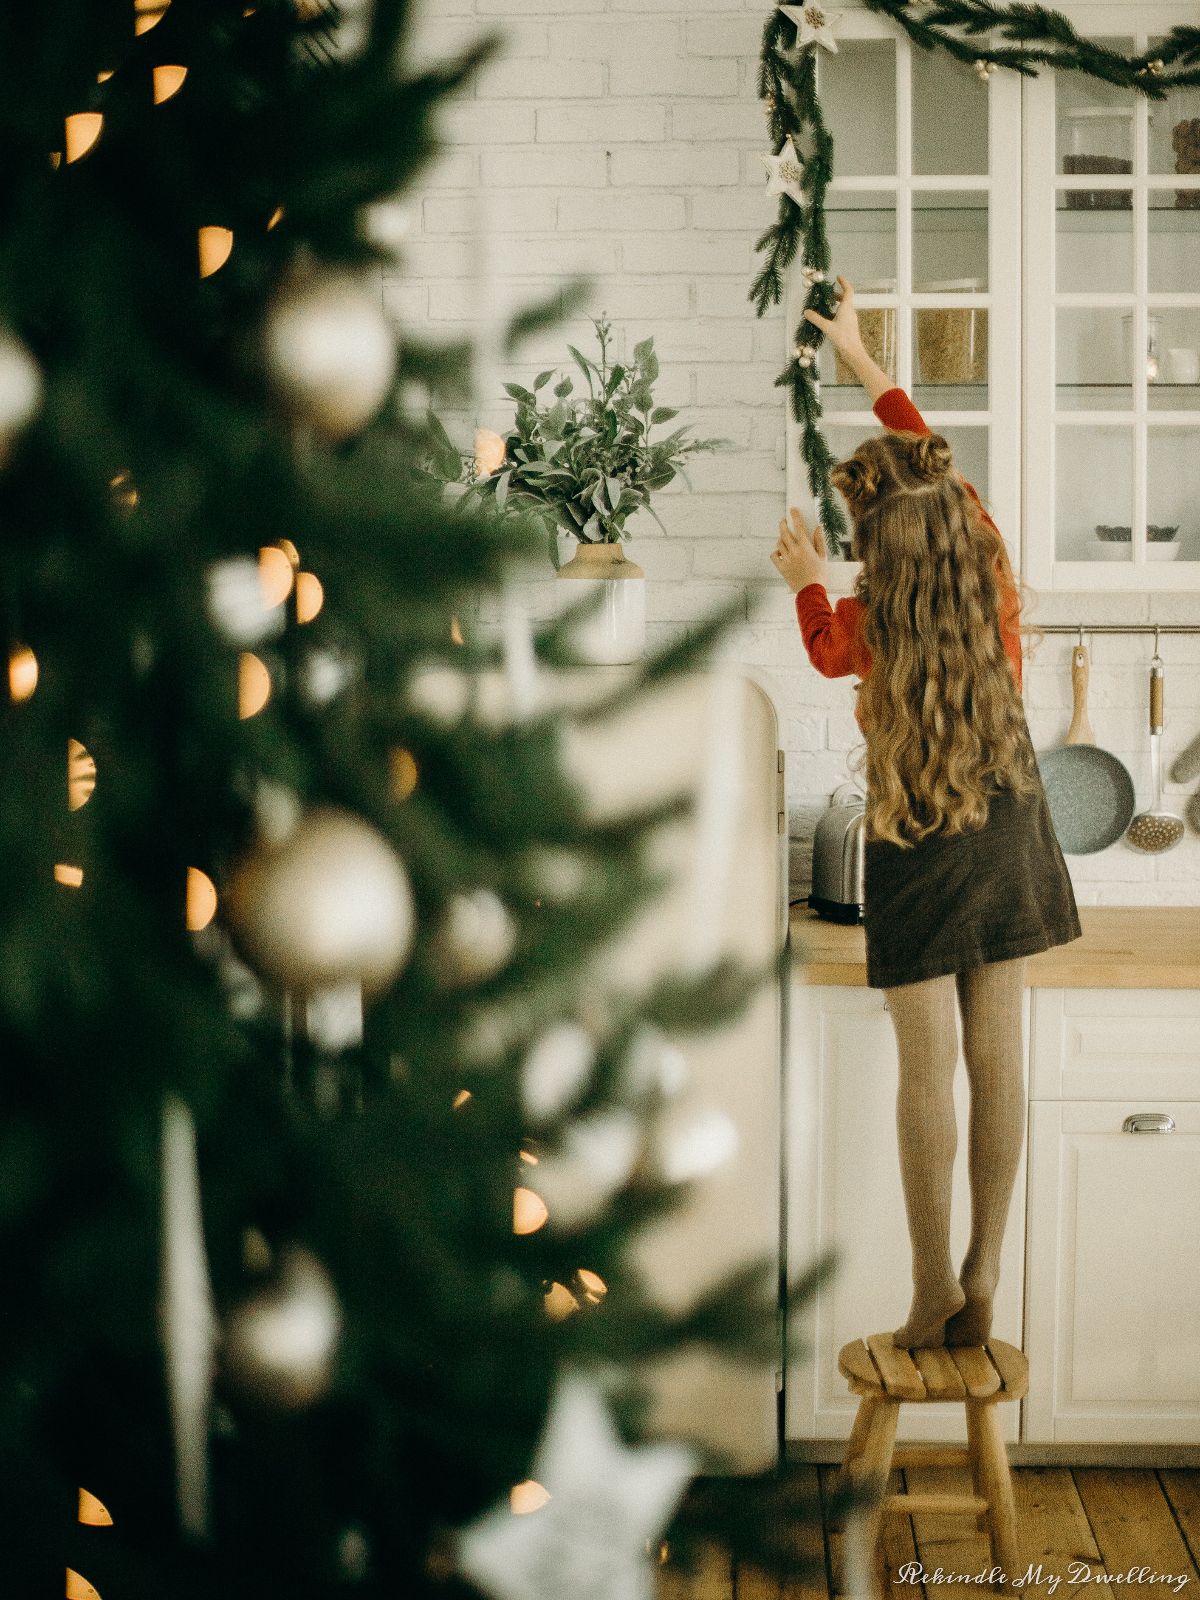 A girl decorating with green garland.